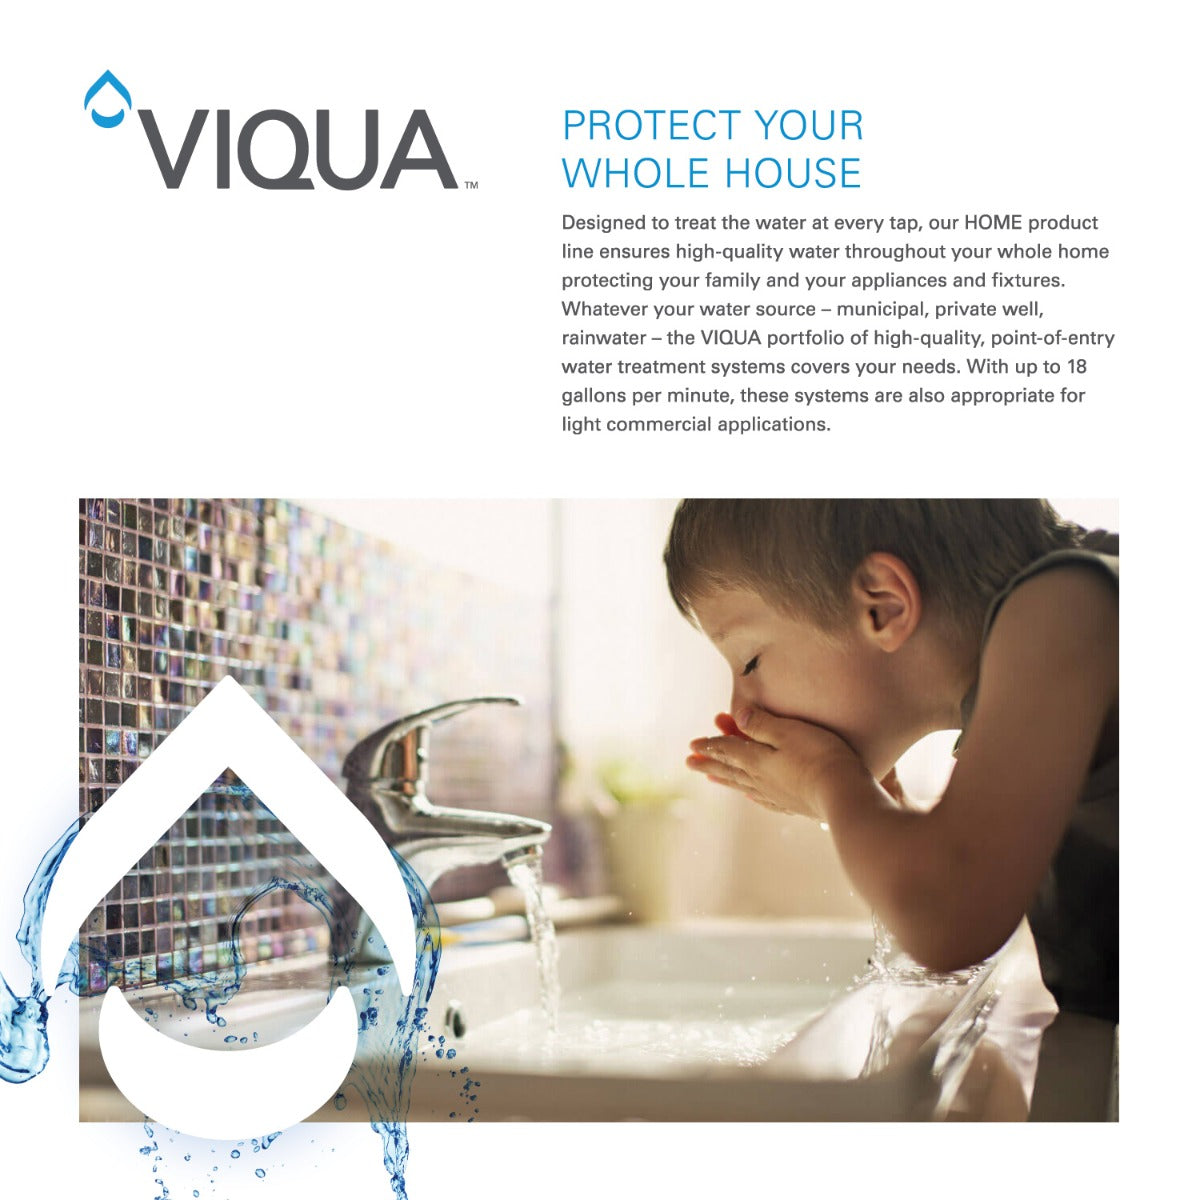 VP950 UltraViolet Water Disinfection System by Viqua